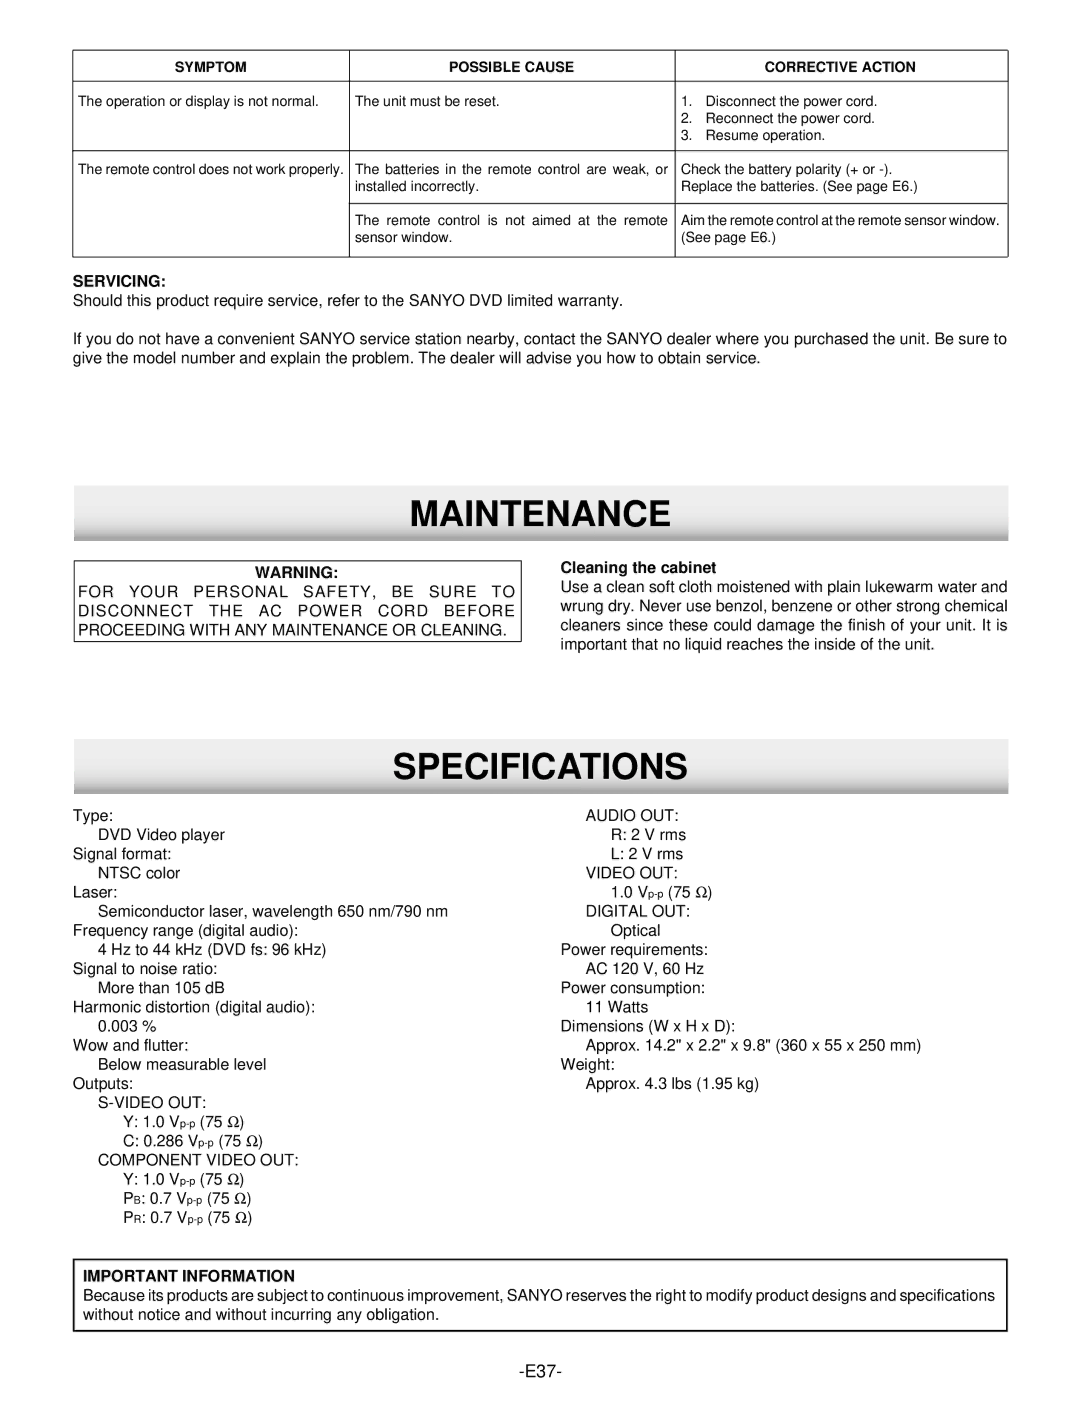 Sanyo DWM-390 instruction manual Maintenance, Specifications, Cleaning the cabinet 